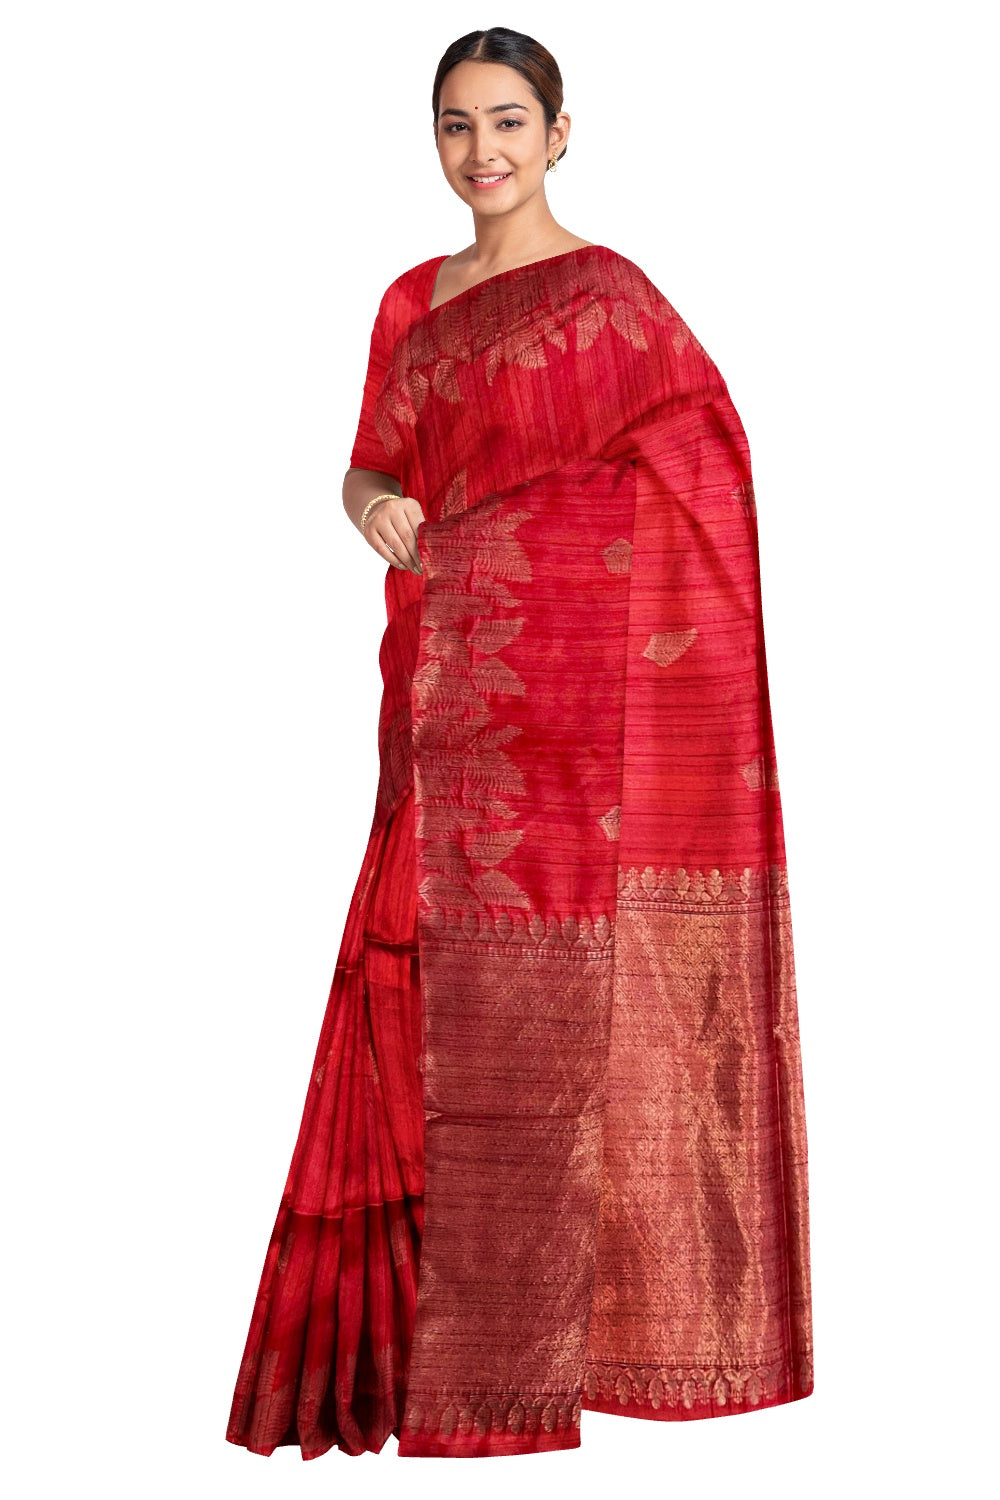 Southloom Red Semi Tussar Designer Saree with Tassels